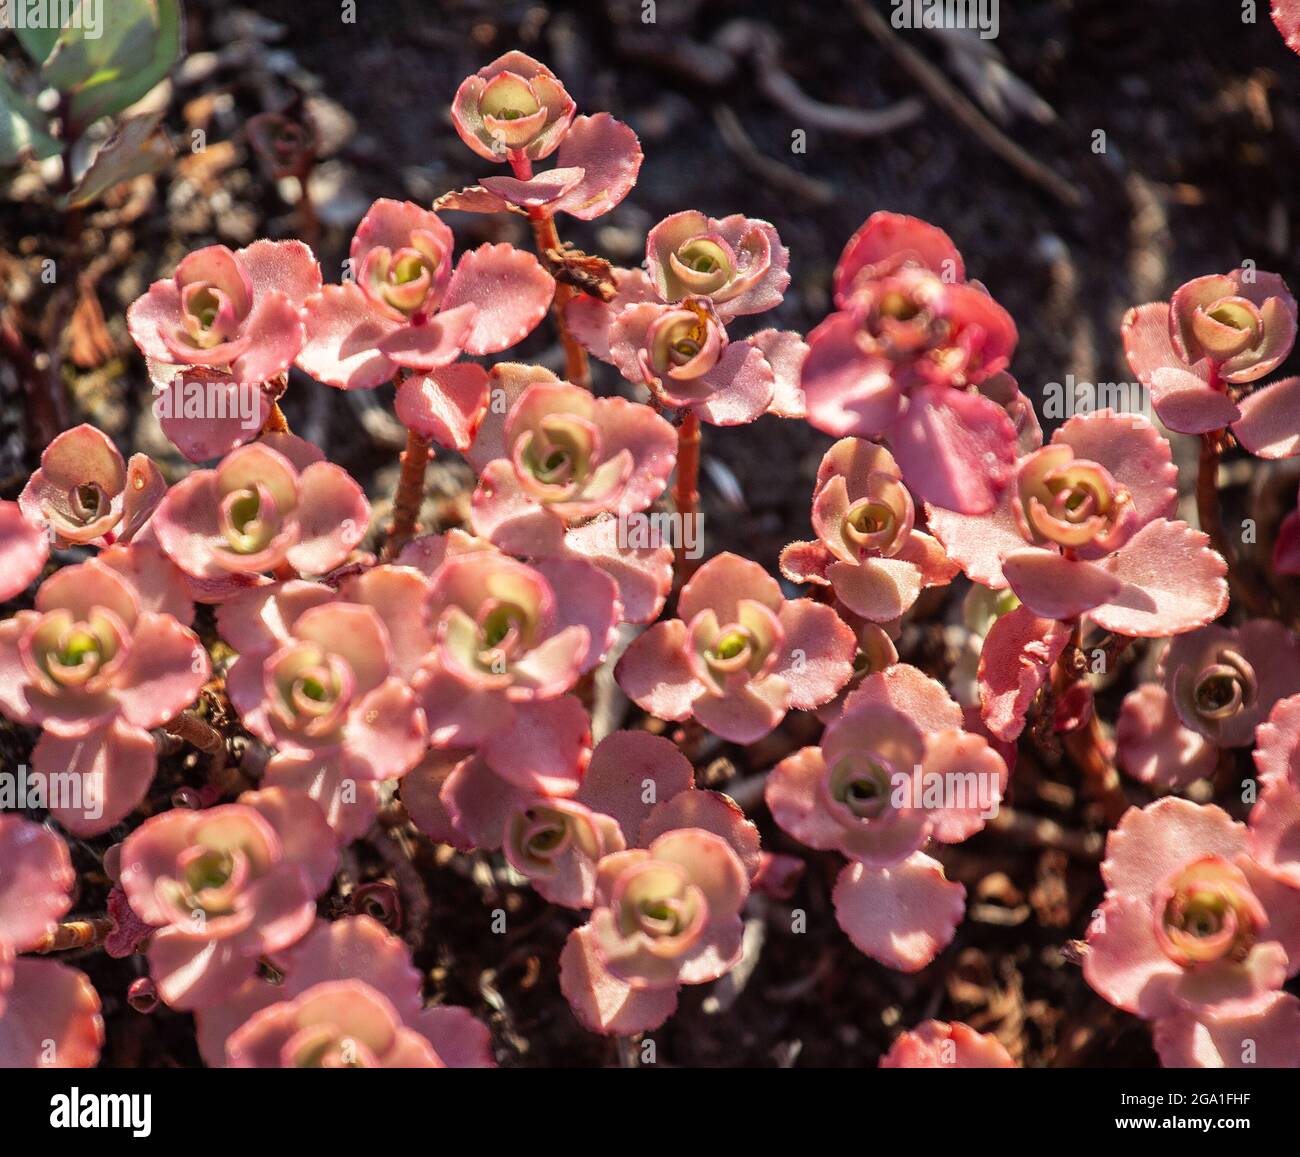 Close up texture background of rosy pink and green sedum stone crop plants (crassula) growing in a sunny outdoor ornamental garden Stock Photo